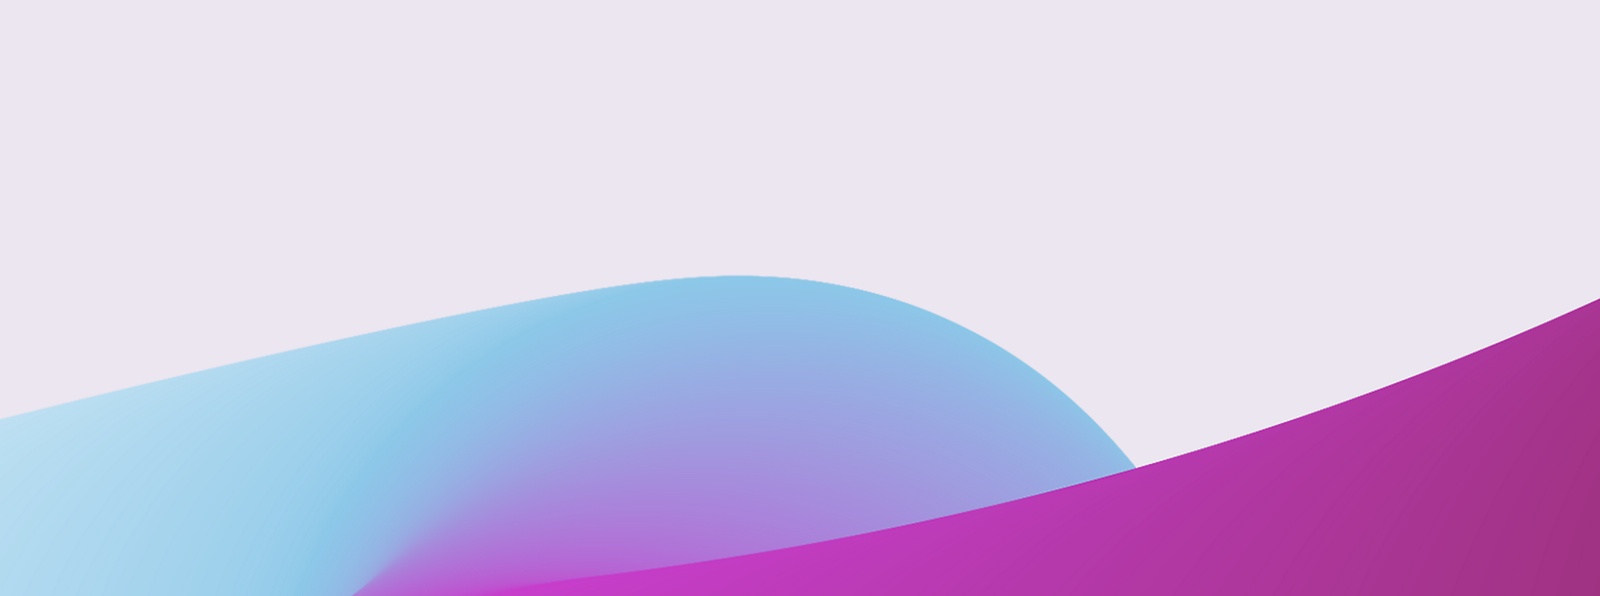 Soft gradient background with smooth wavy layers transitioning from blue to pink.